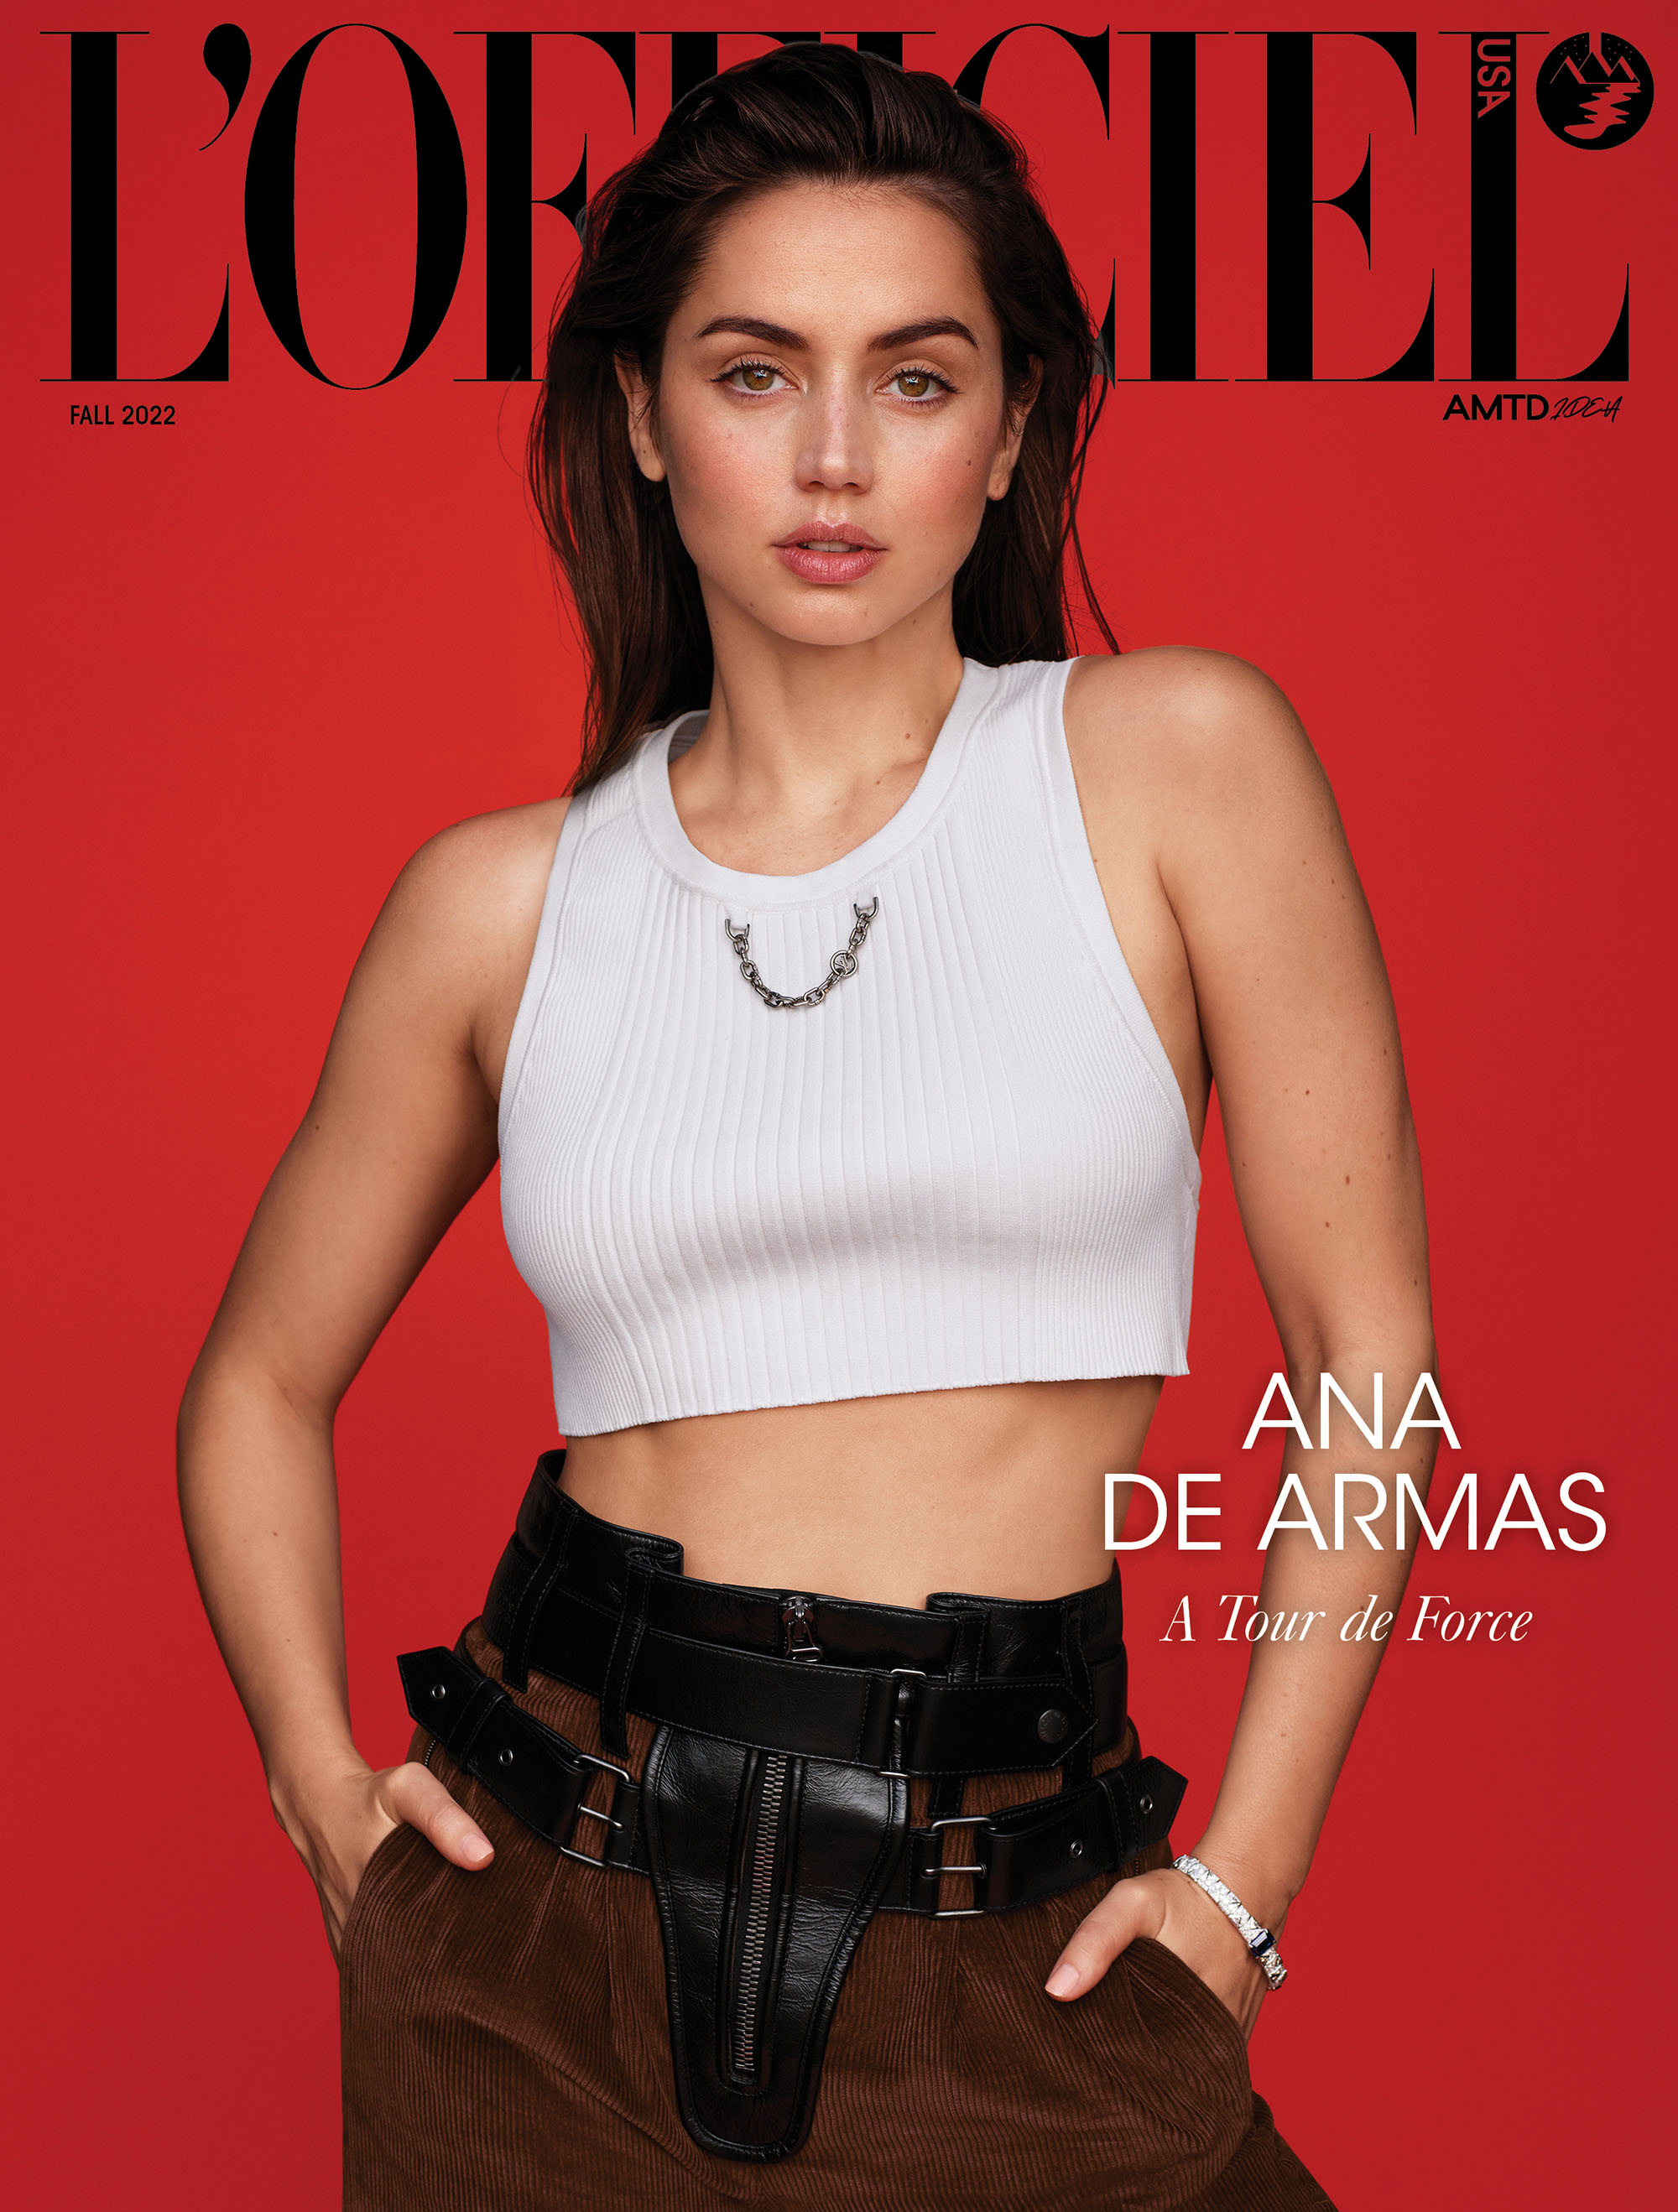 Ana de Armas Opens Up About Life in the Spotlight and Blondes NC-17 Rating